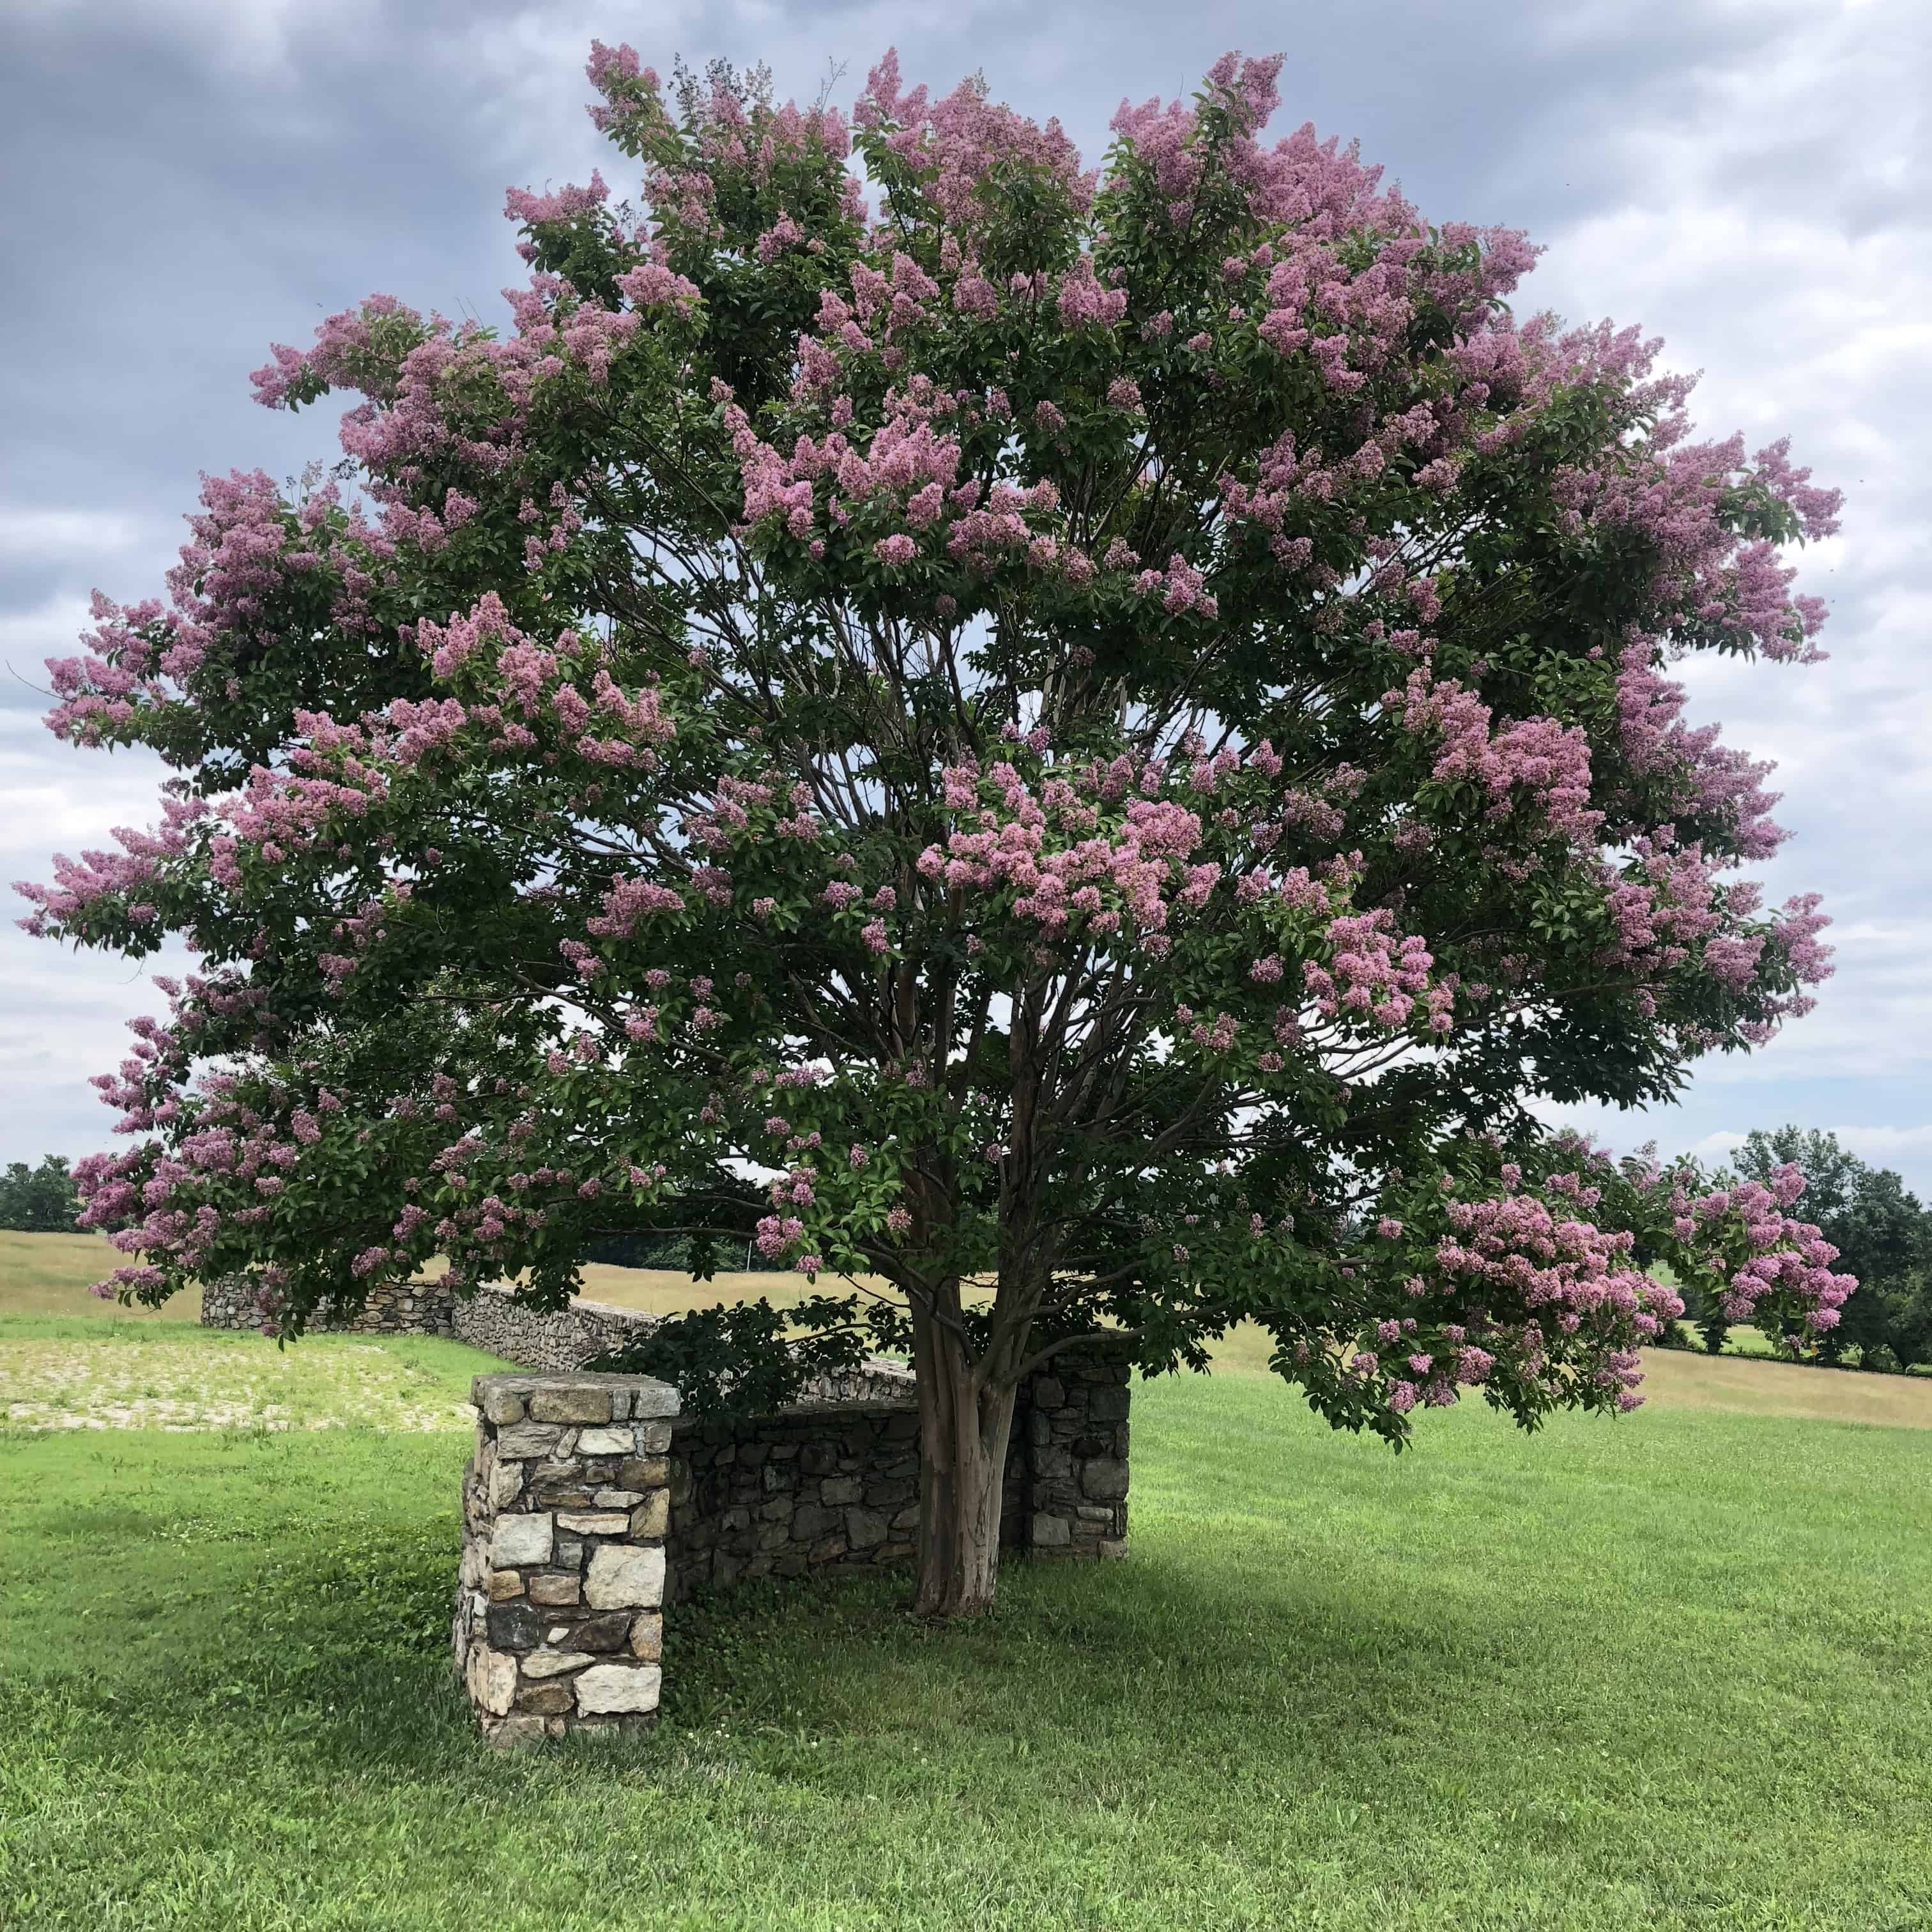 Lovely pink crepe myrtle used in landscaping in the Plains, VA